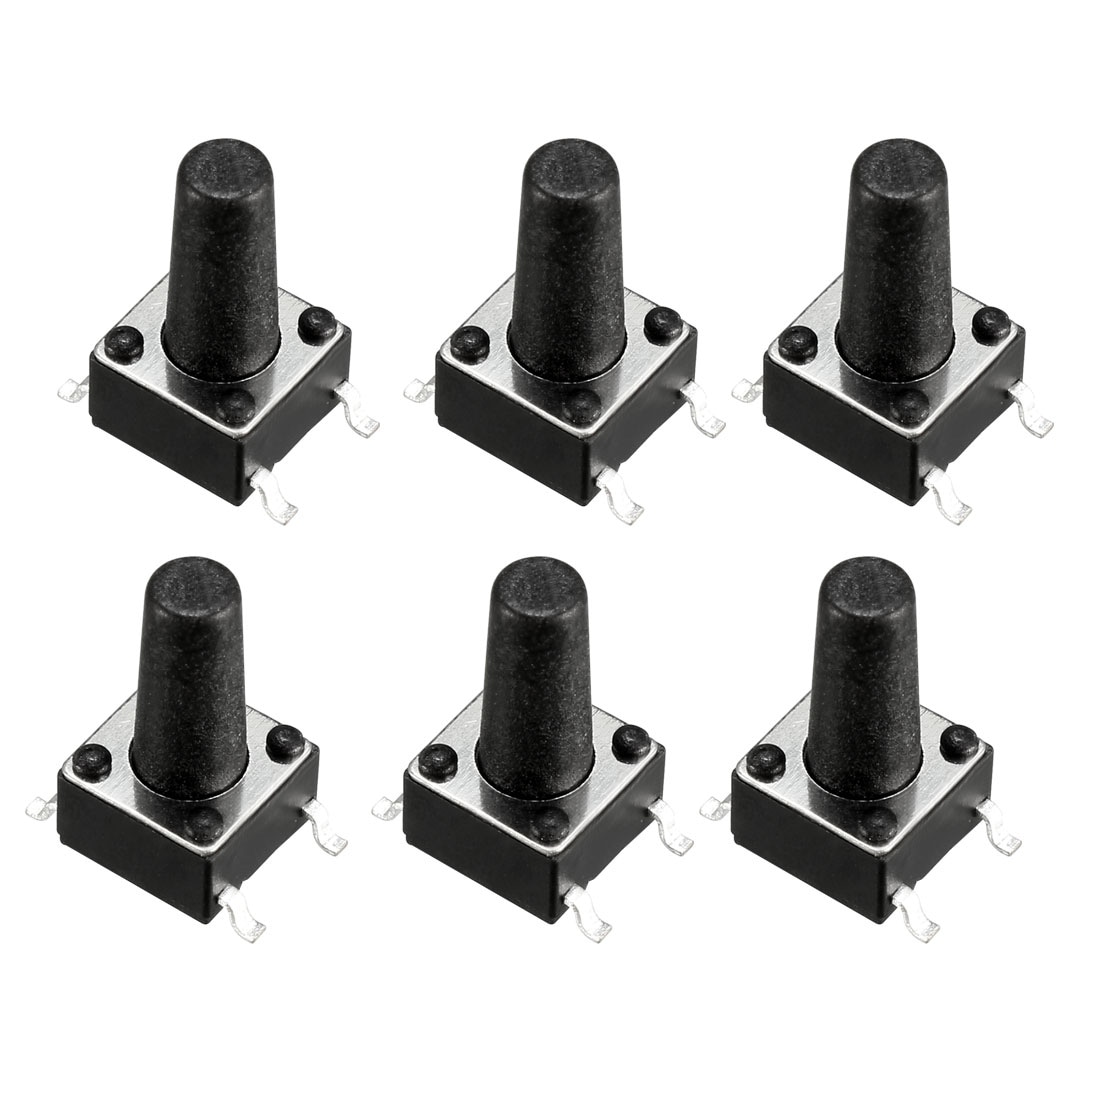 100pcs 6x6 3.1mm-13mm 4-pin DIP Tactile Push Button Switch Touch commutate